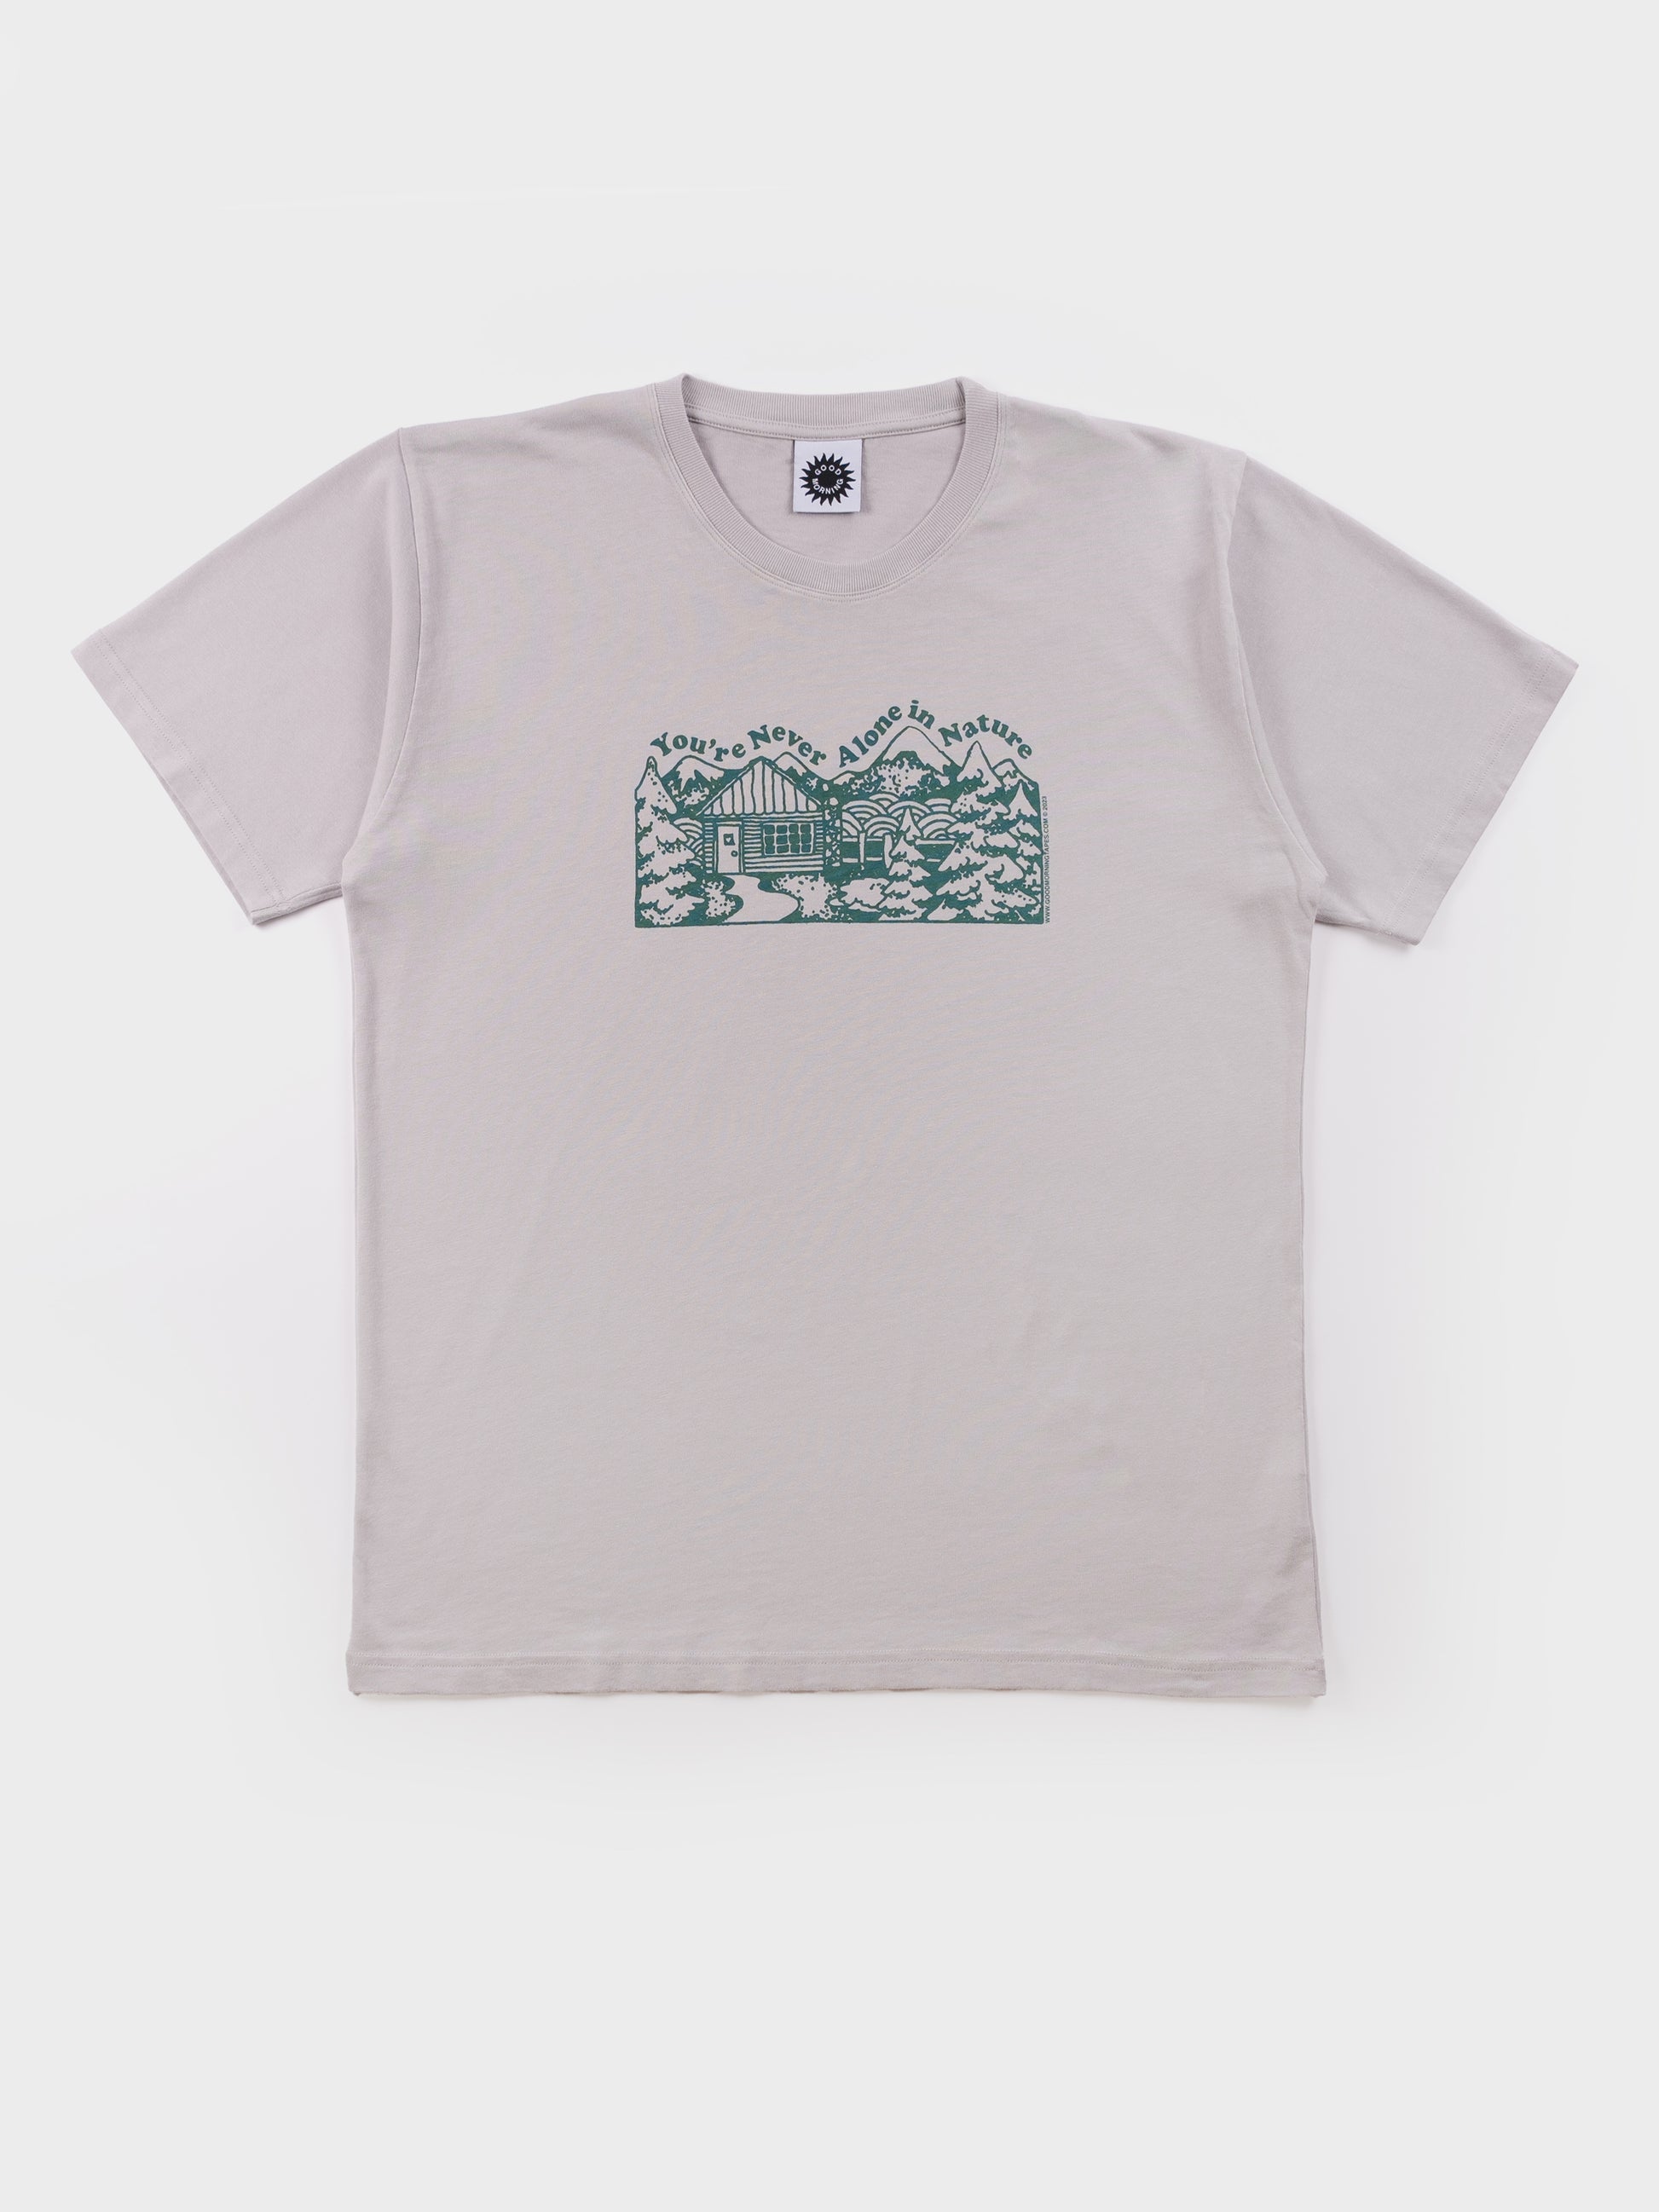 Good Morning Tapes You're Never Alone in Nature SS T-Shirt - Stone